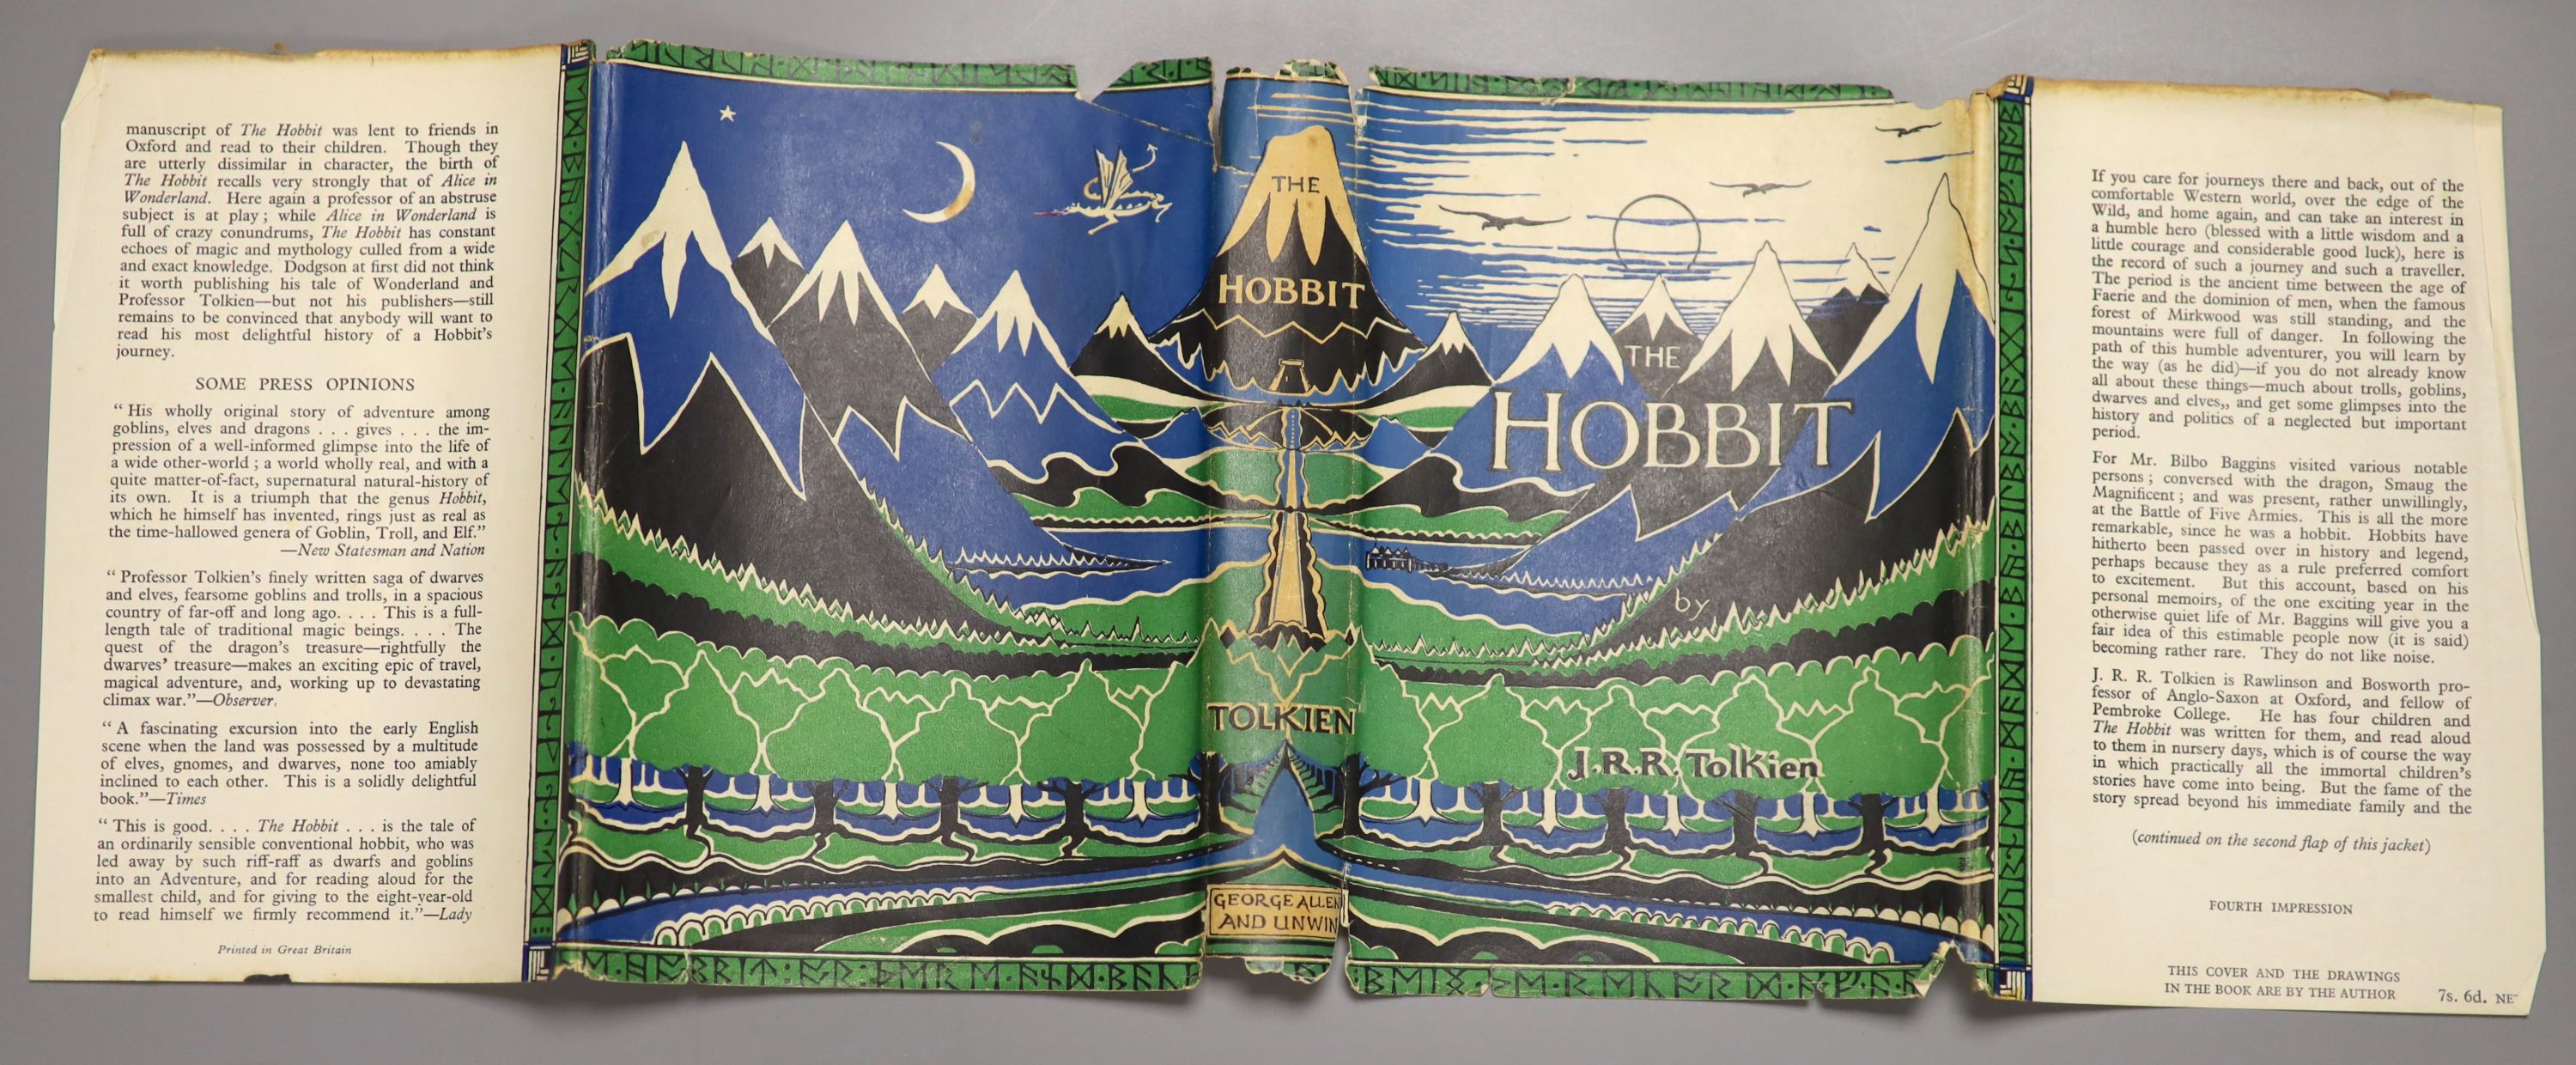 Tolkien, John, Ronald, Reuel - The Hobbit, 1st edition, 4th and last impression of the first edition, original cloth, in d/j with tears to head and foot of spine and a small amount of loss, Allen and Unwin, London, 1946;